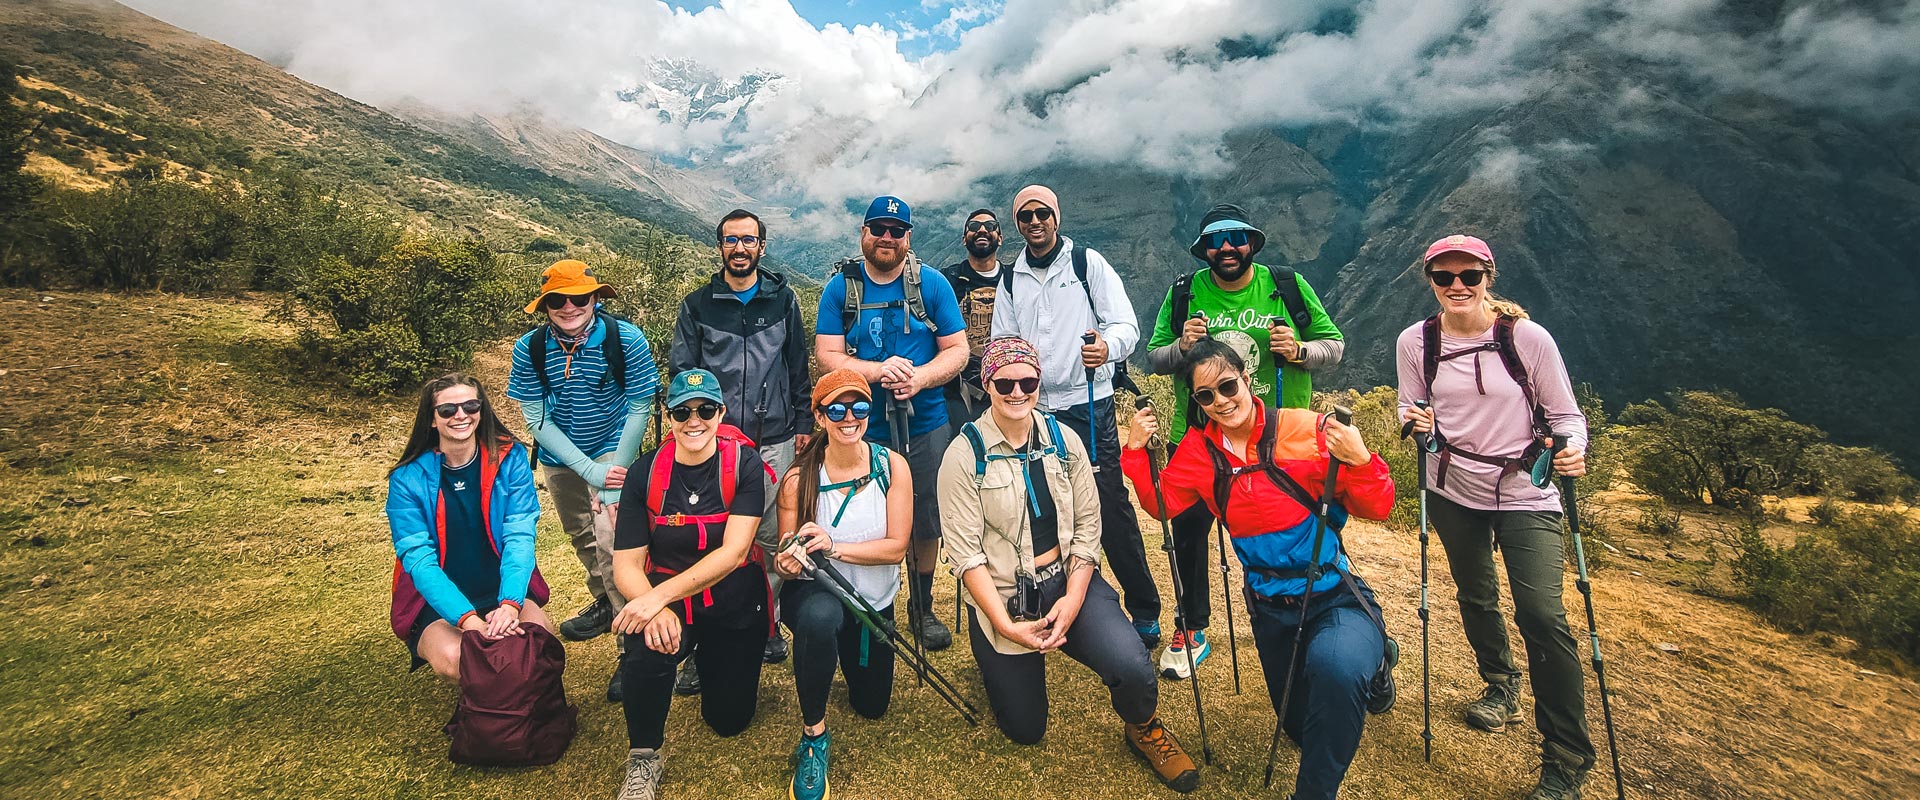 Frequently Asked Questions for Salkantay Trek to Machu Picchu